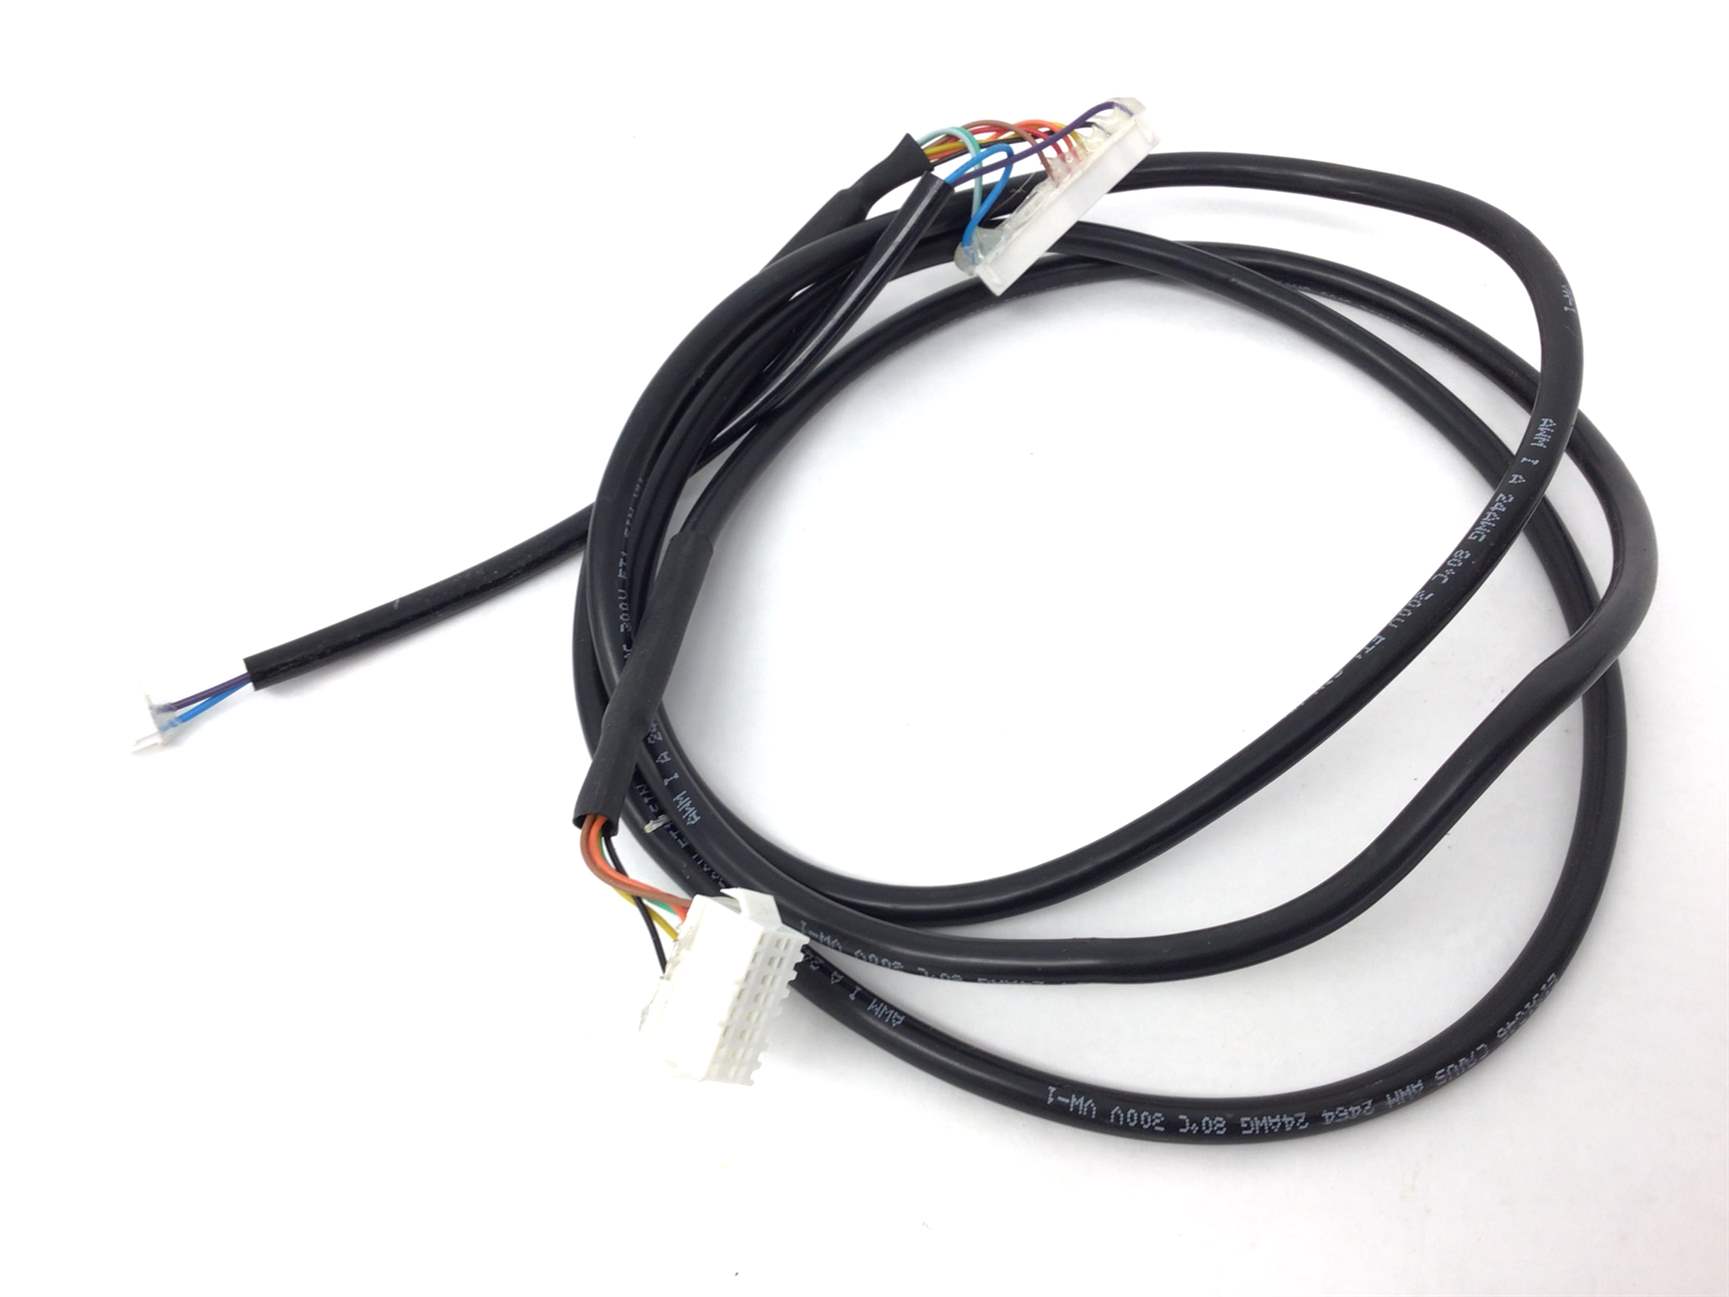 Display To Pedestal Cable (Used)